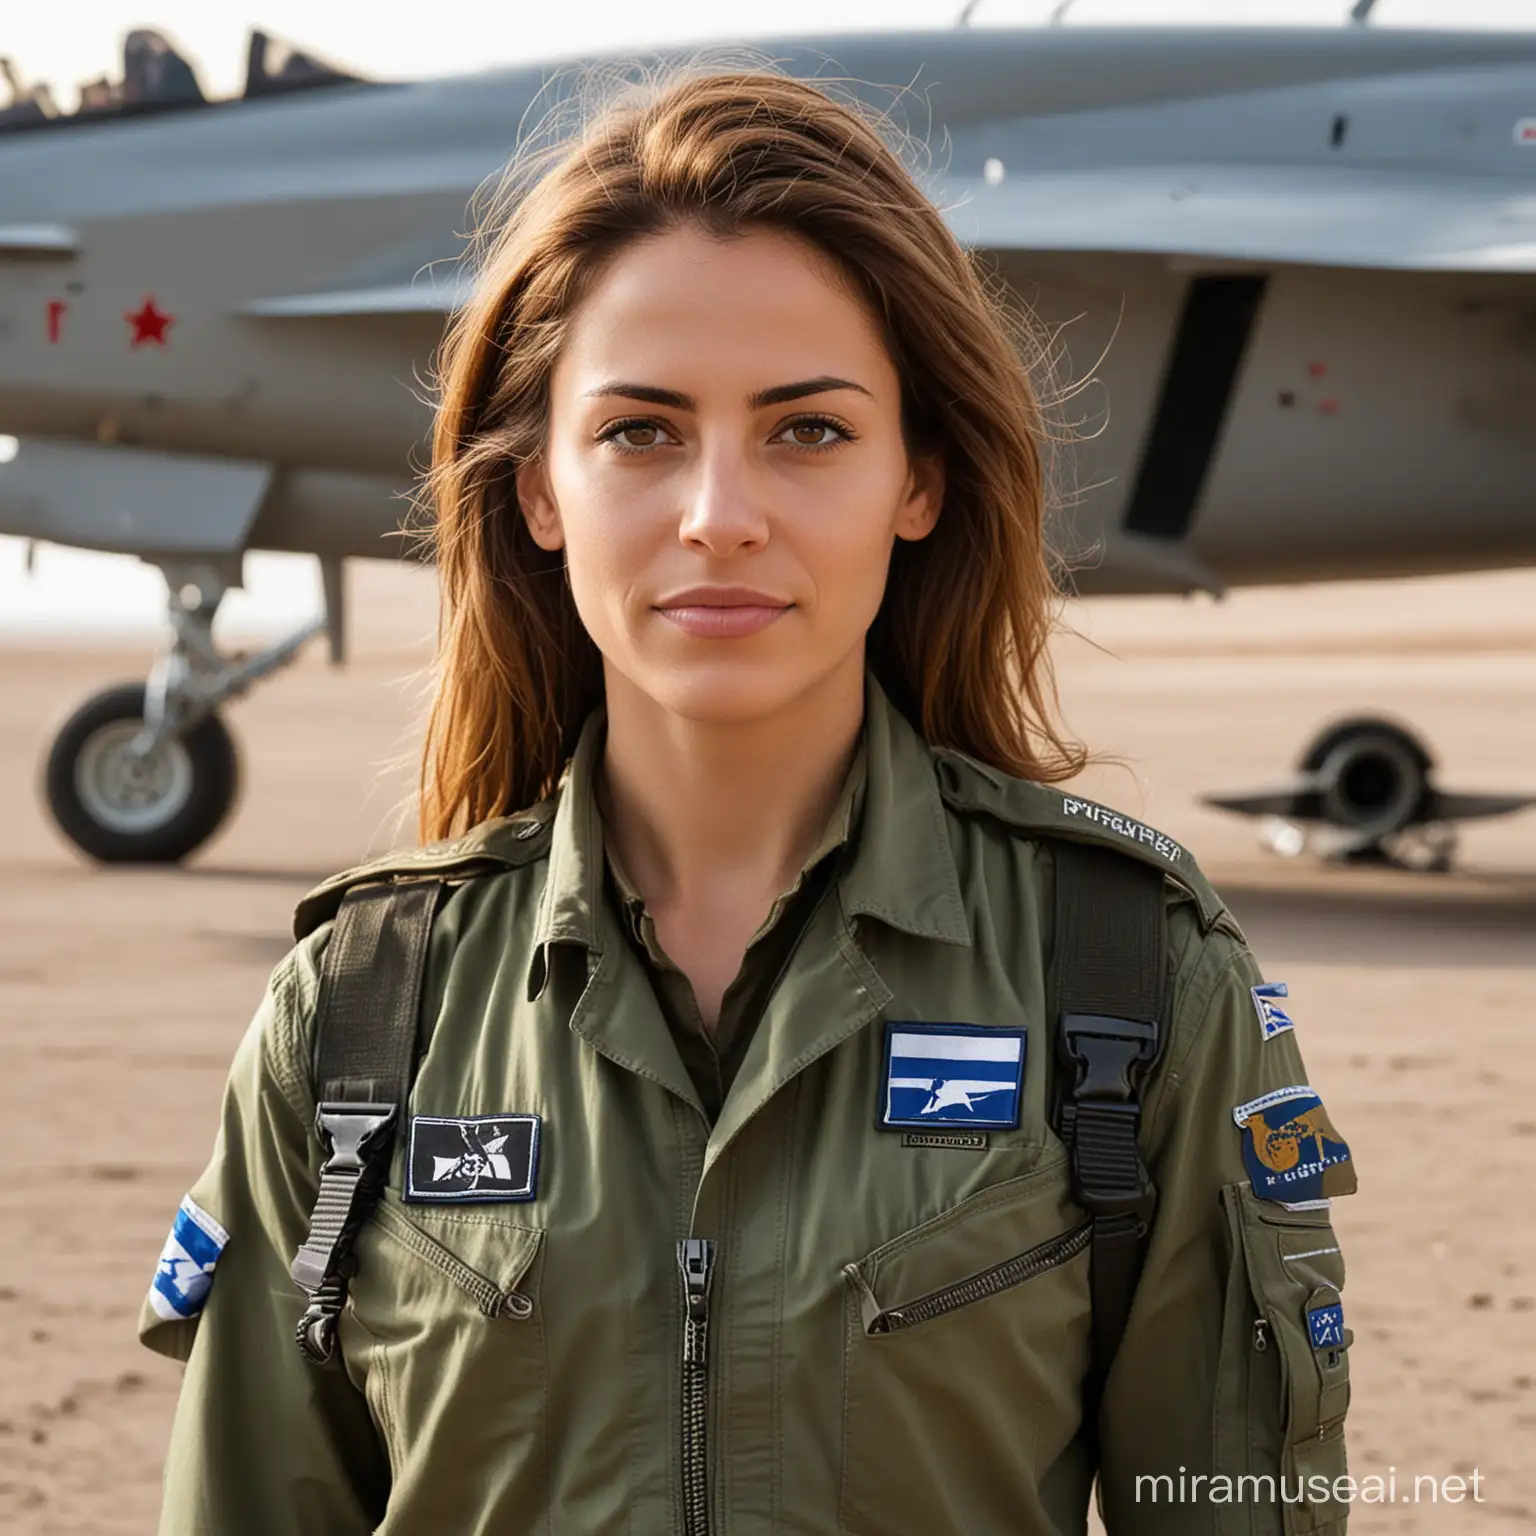 Israeli Air Force Female Pilot with Fighter Jet